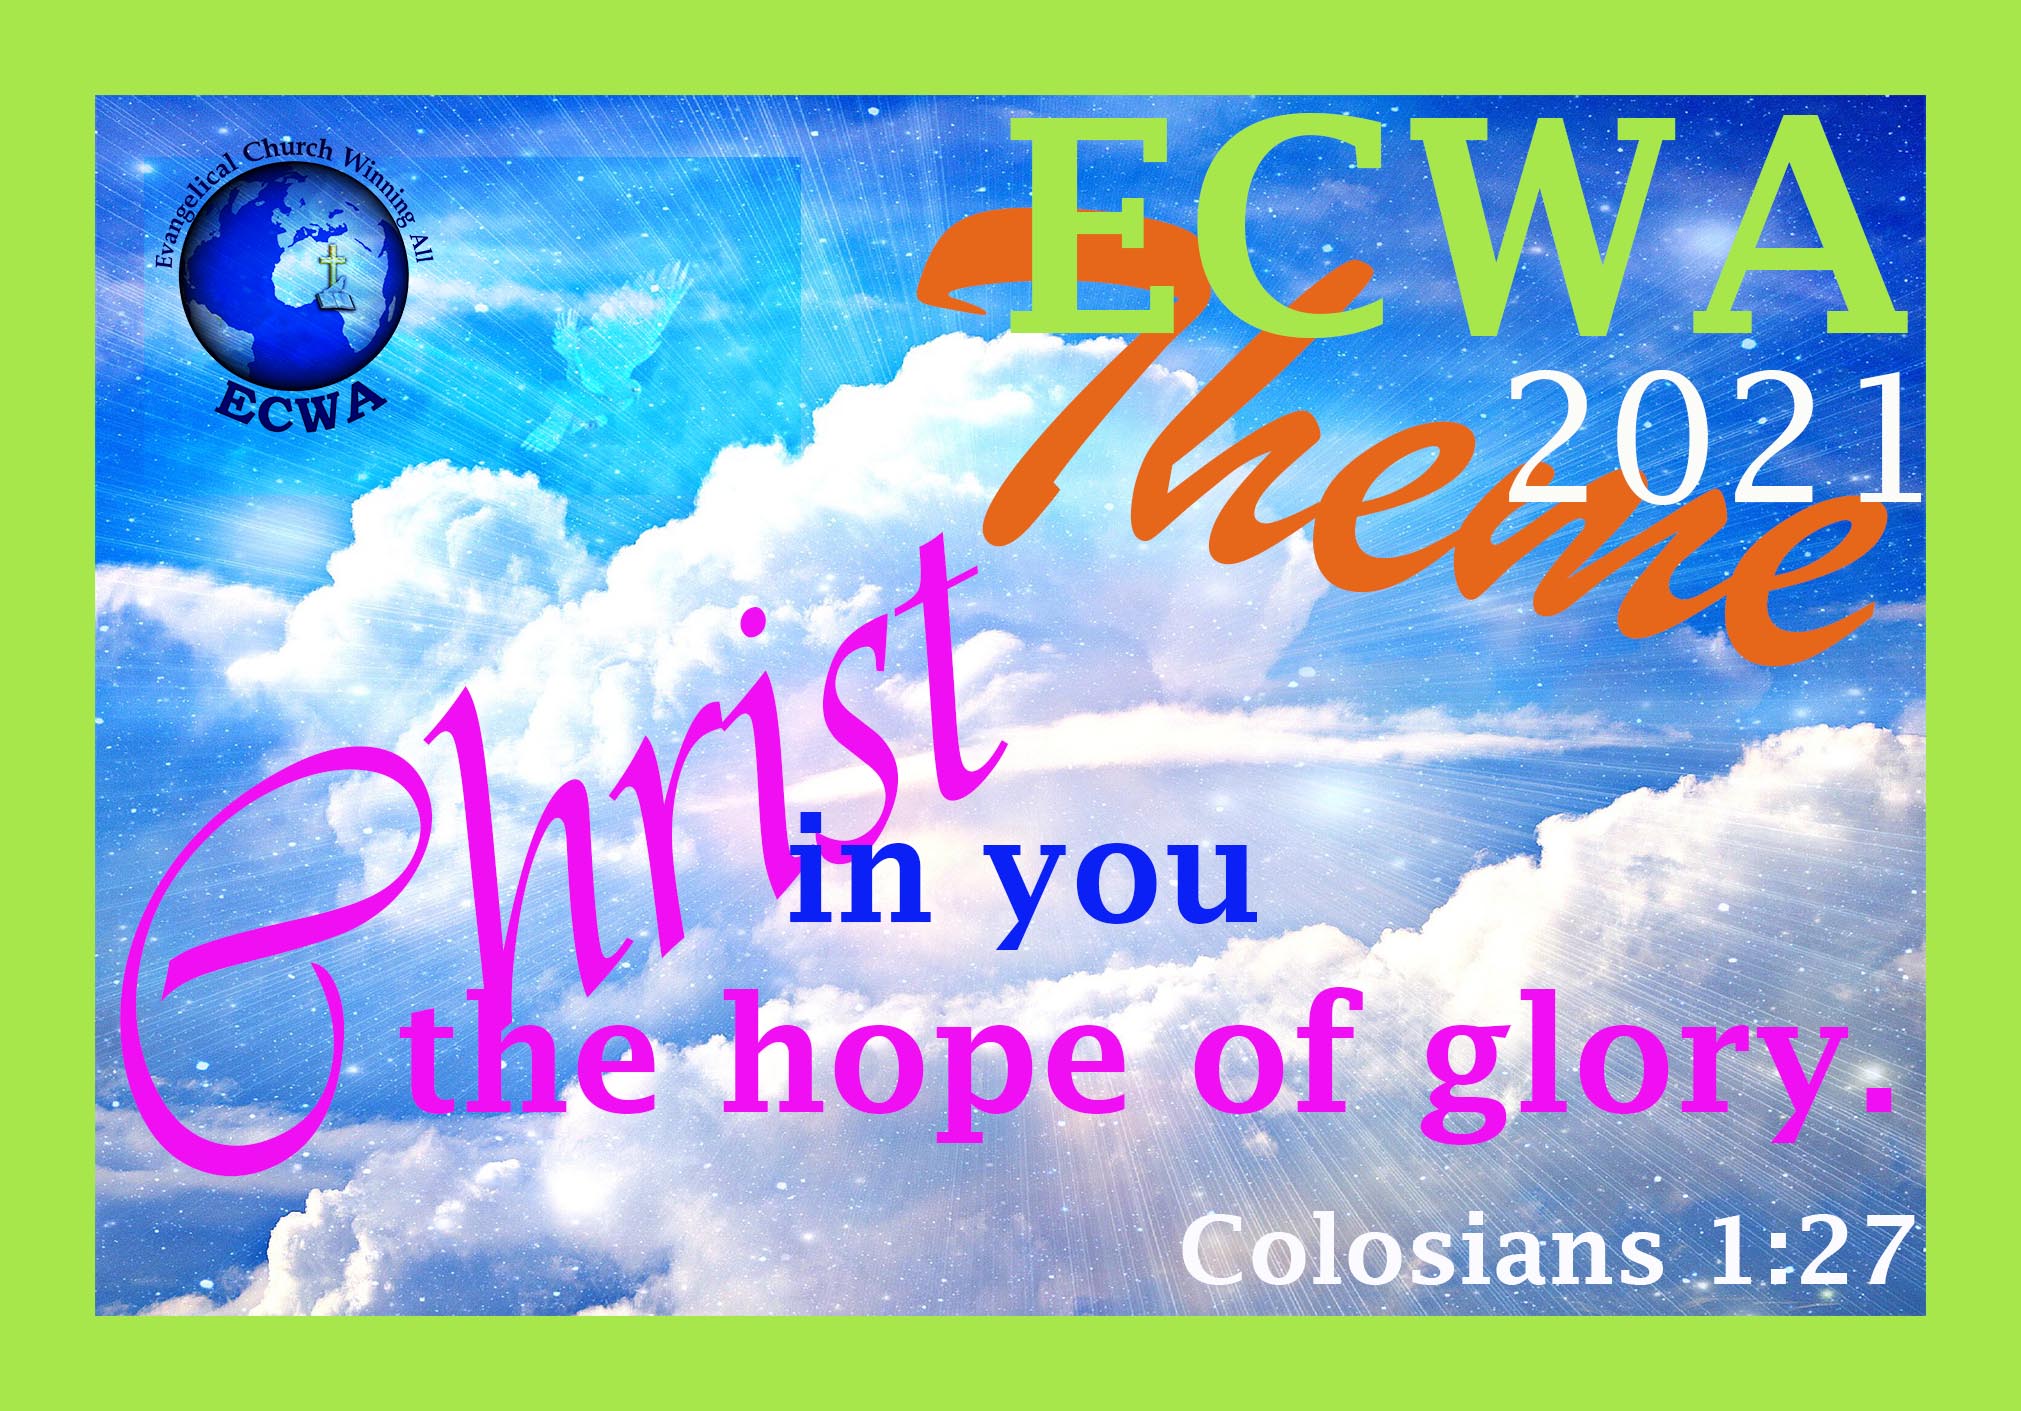 Pastoral Letter/ECWA 2021 Theme: Christ in you, the hope of glory